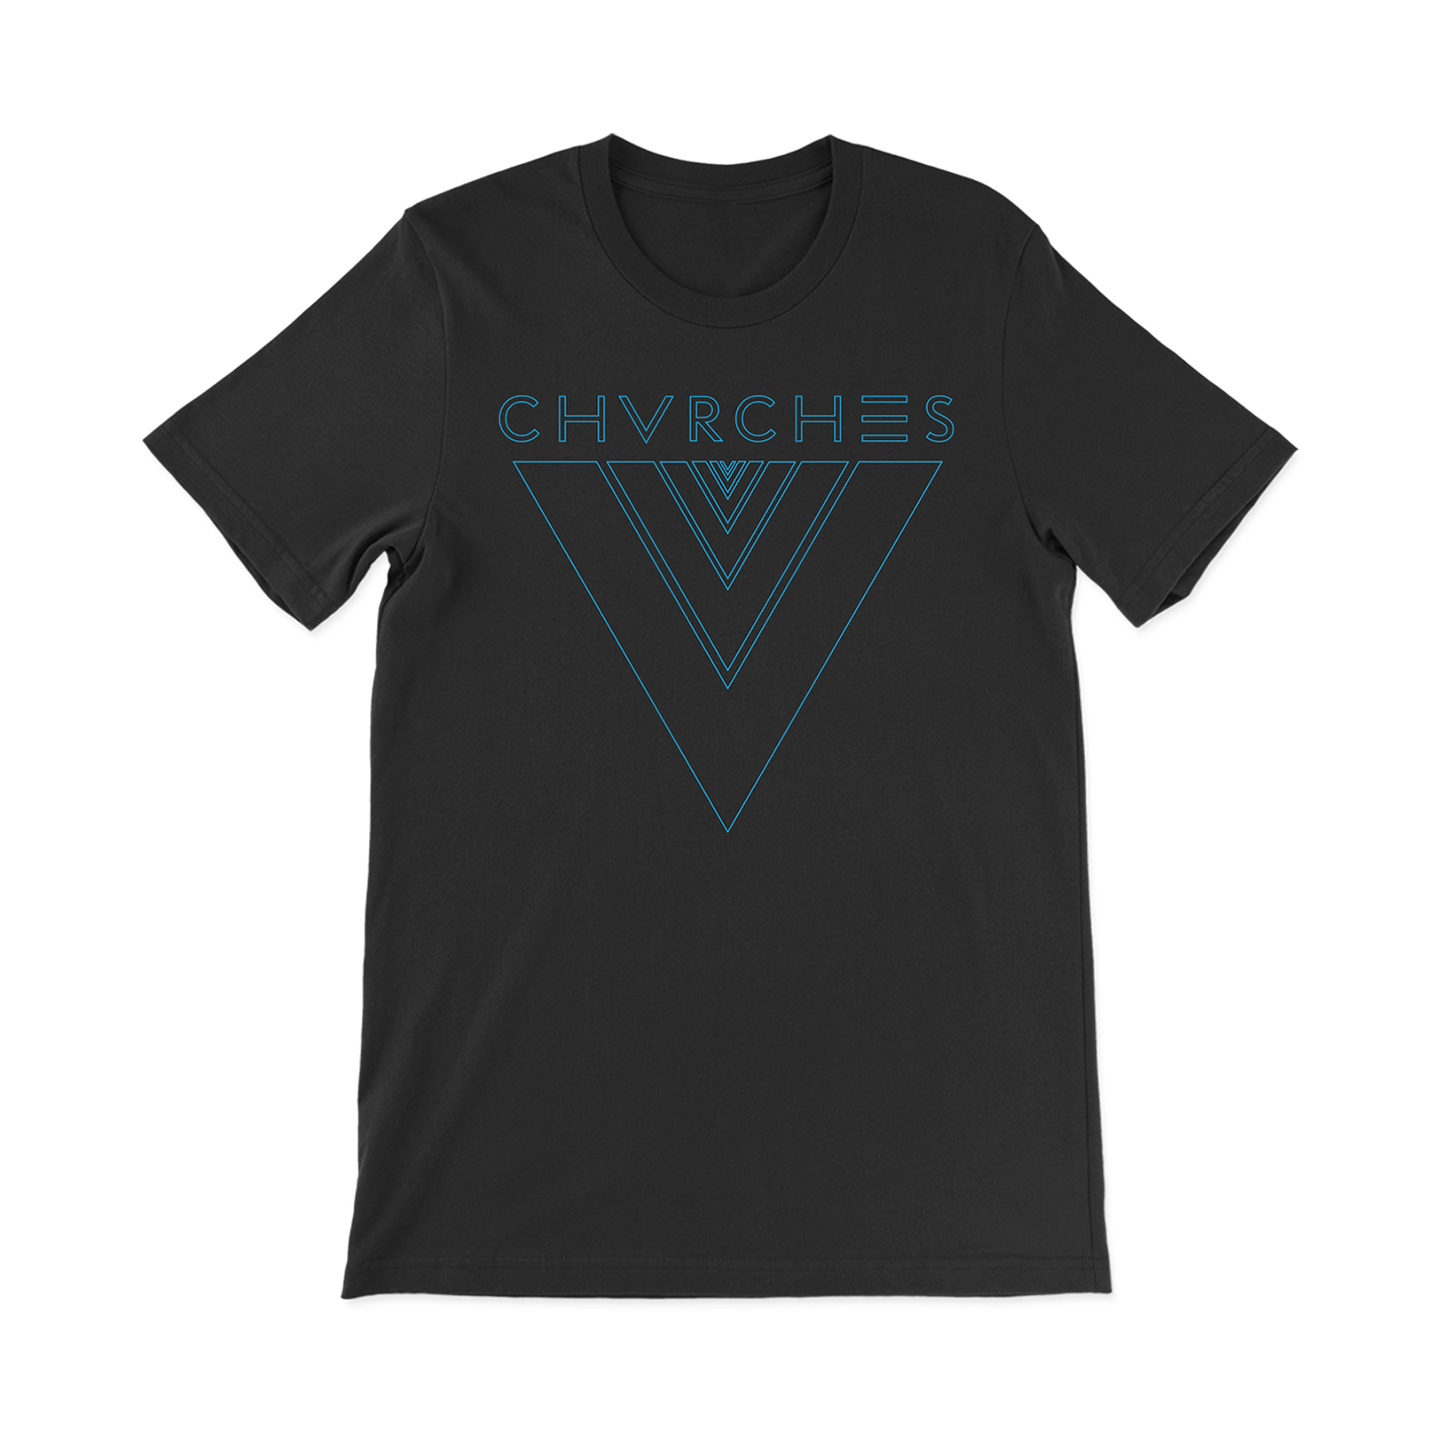 100% black cotton unisex t-shirt with a retail fit featuring the original Tron T-Shirt artwork printed in blue.